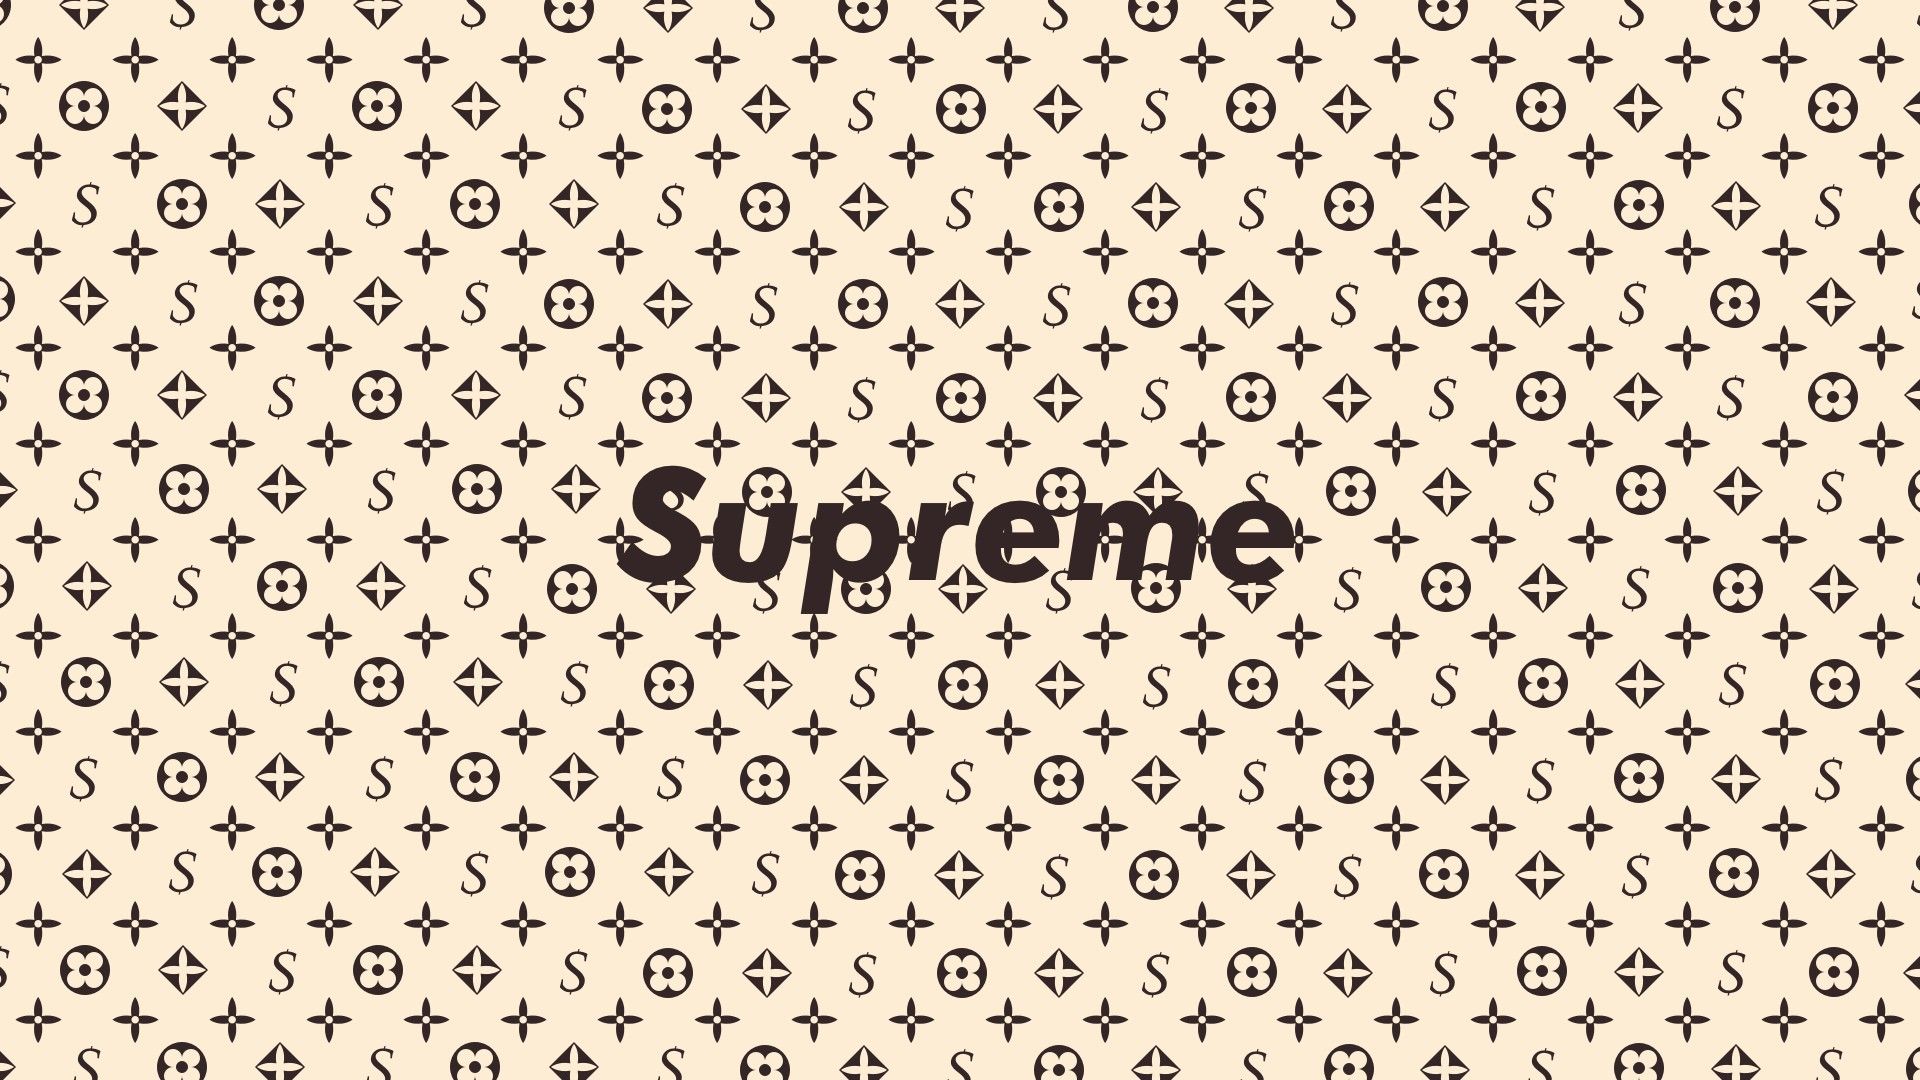 Supreme Gucci Wallpapers - Top Free Supreme Gucci Backgrounds